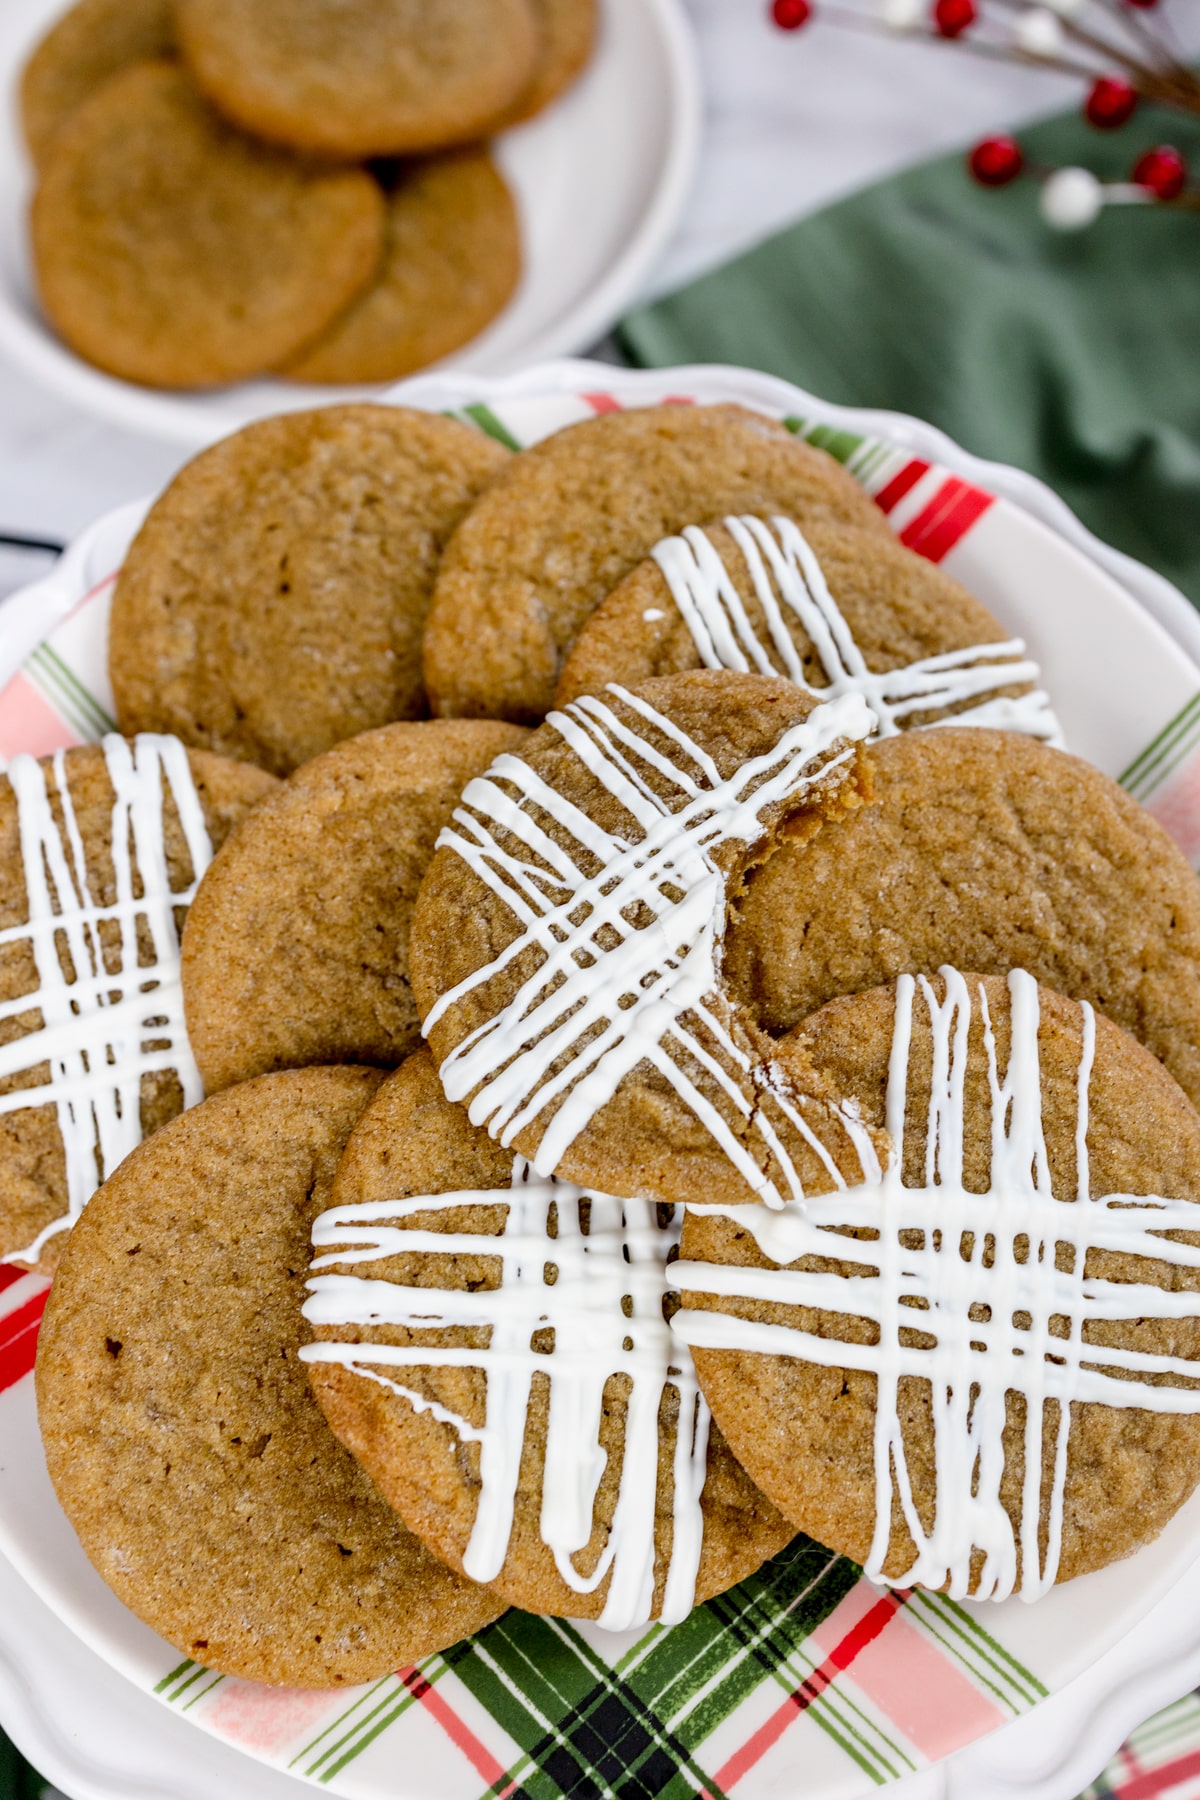 A plate filled with Molasses cookies, some decorated with a drizzle of icing.